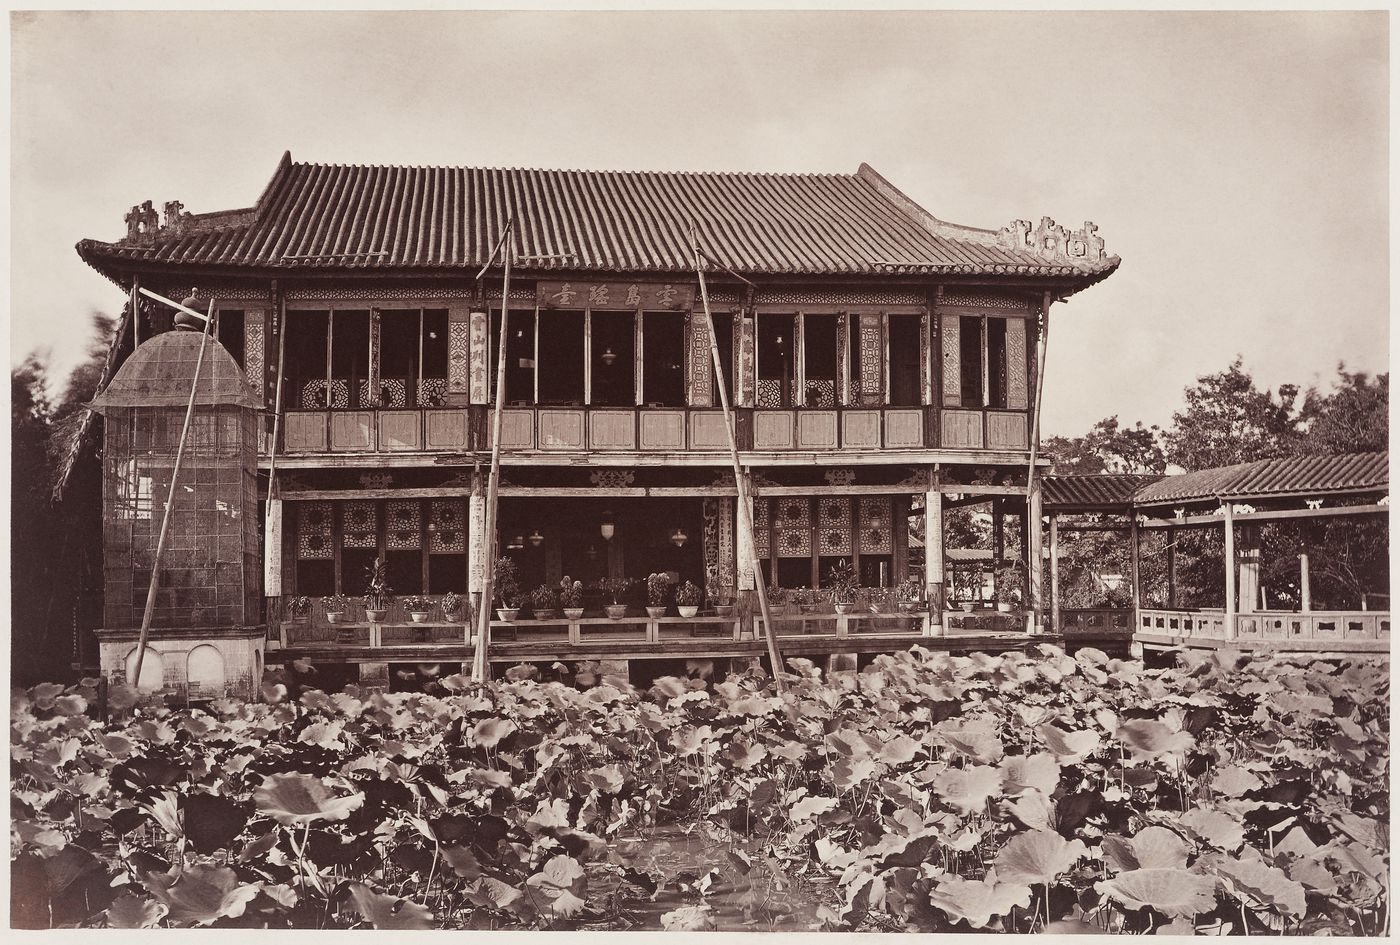 View of summer palace of Pan Shicheng with aviary and humble administrator's garden, Canton (now Guangzhou), Guangdong Province, China